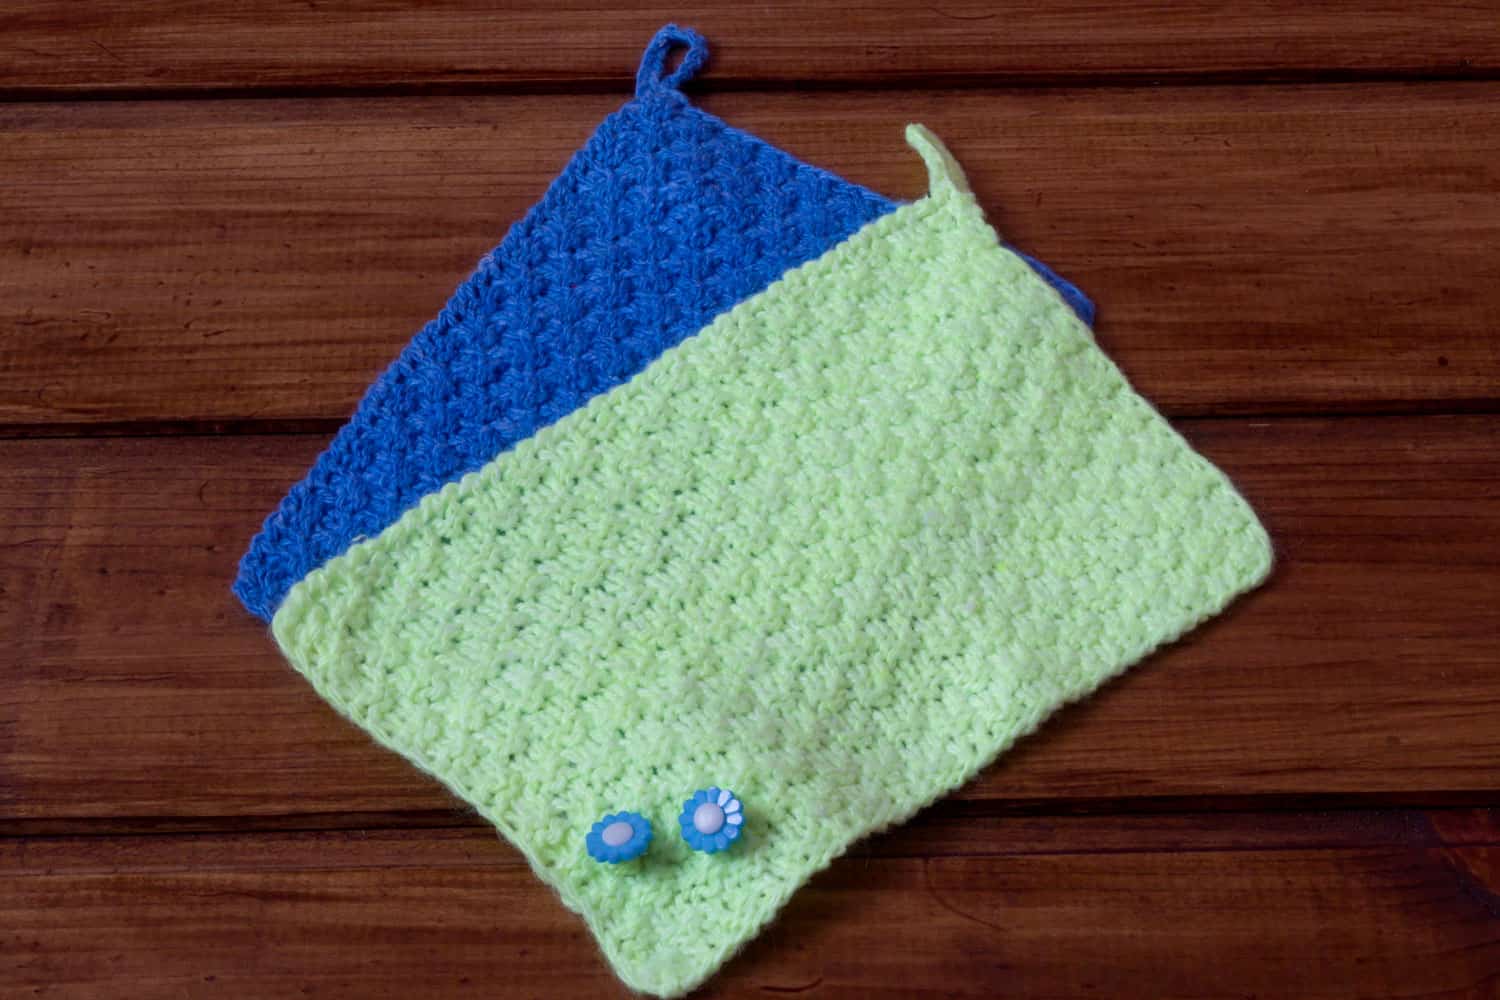 Two hand-knitted napkins or pot holders, green and blue, on wooden background.